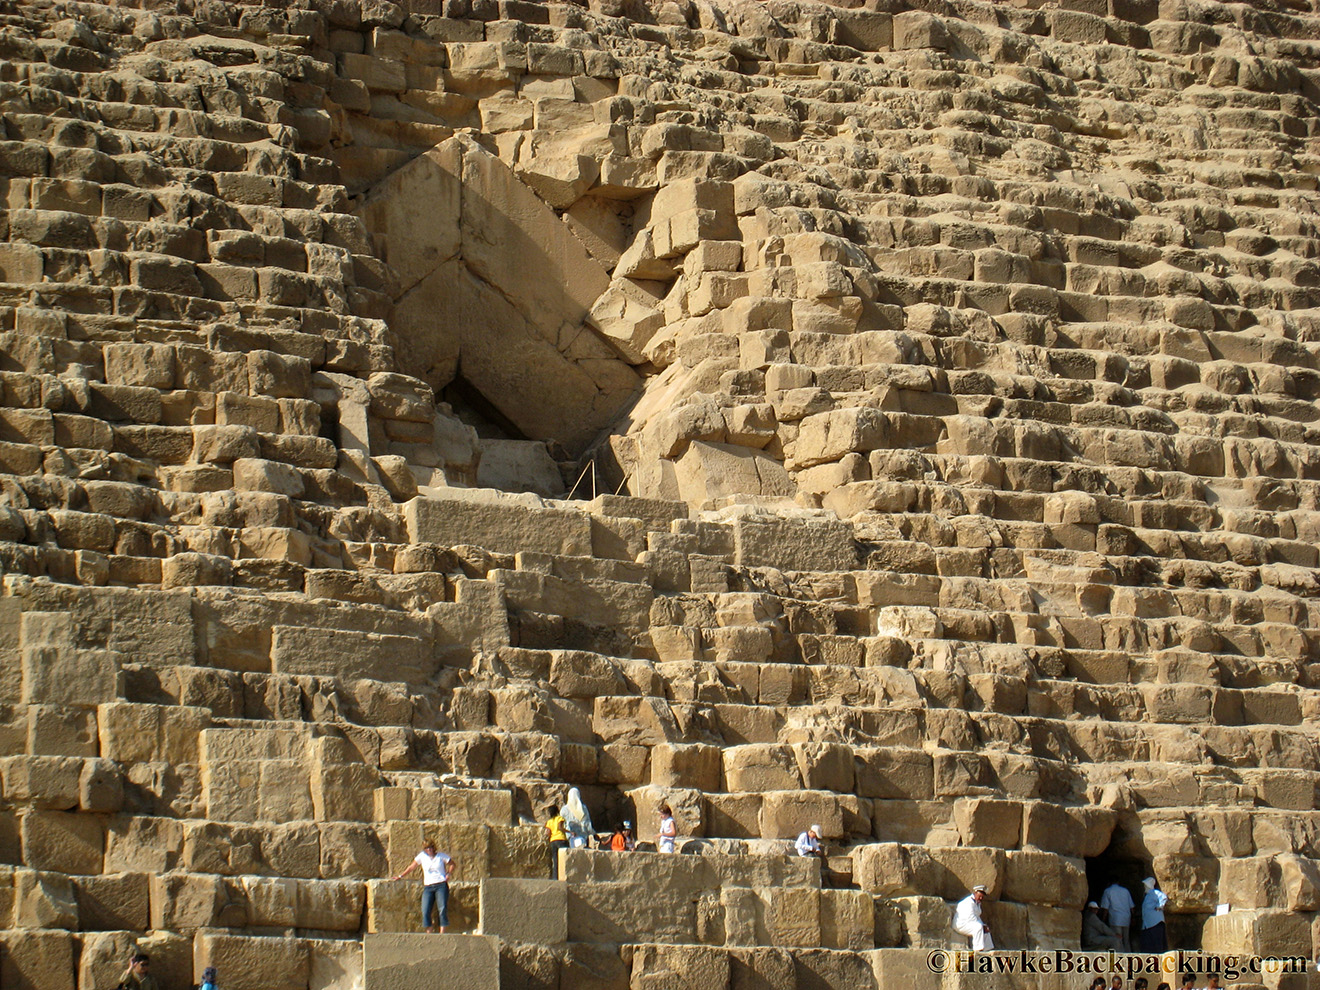 https://hawkebackpacking.com/images/pictures/africa/egypt_2007/cairo_pyramids/egypt_2007_cairo_pyramids_05.jpg